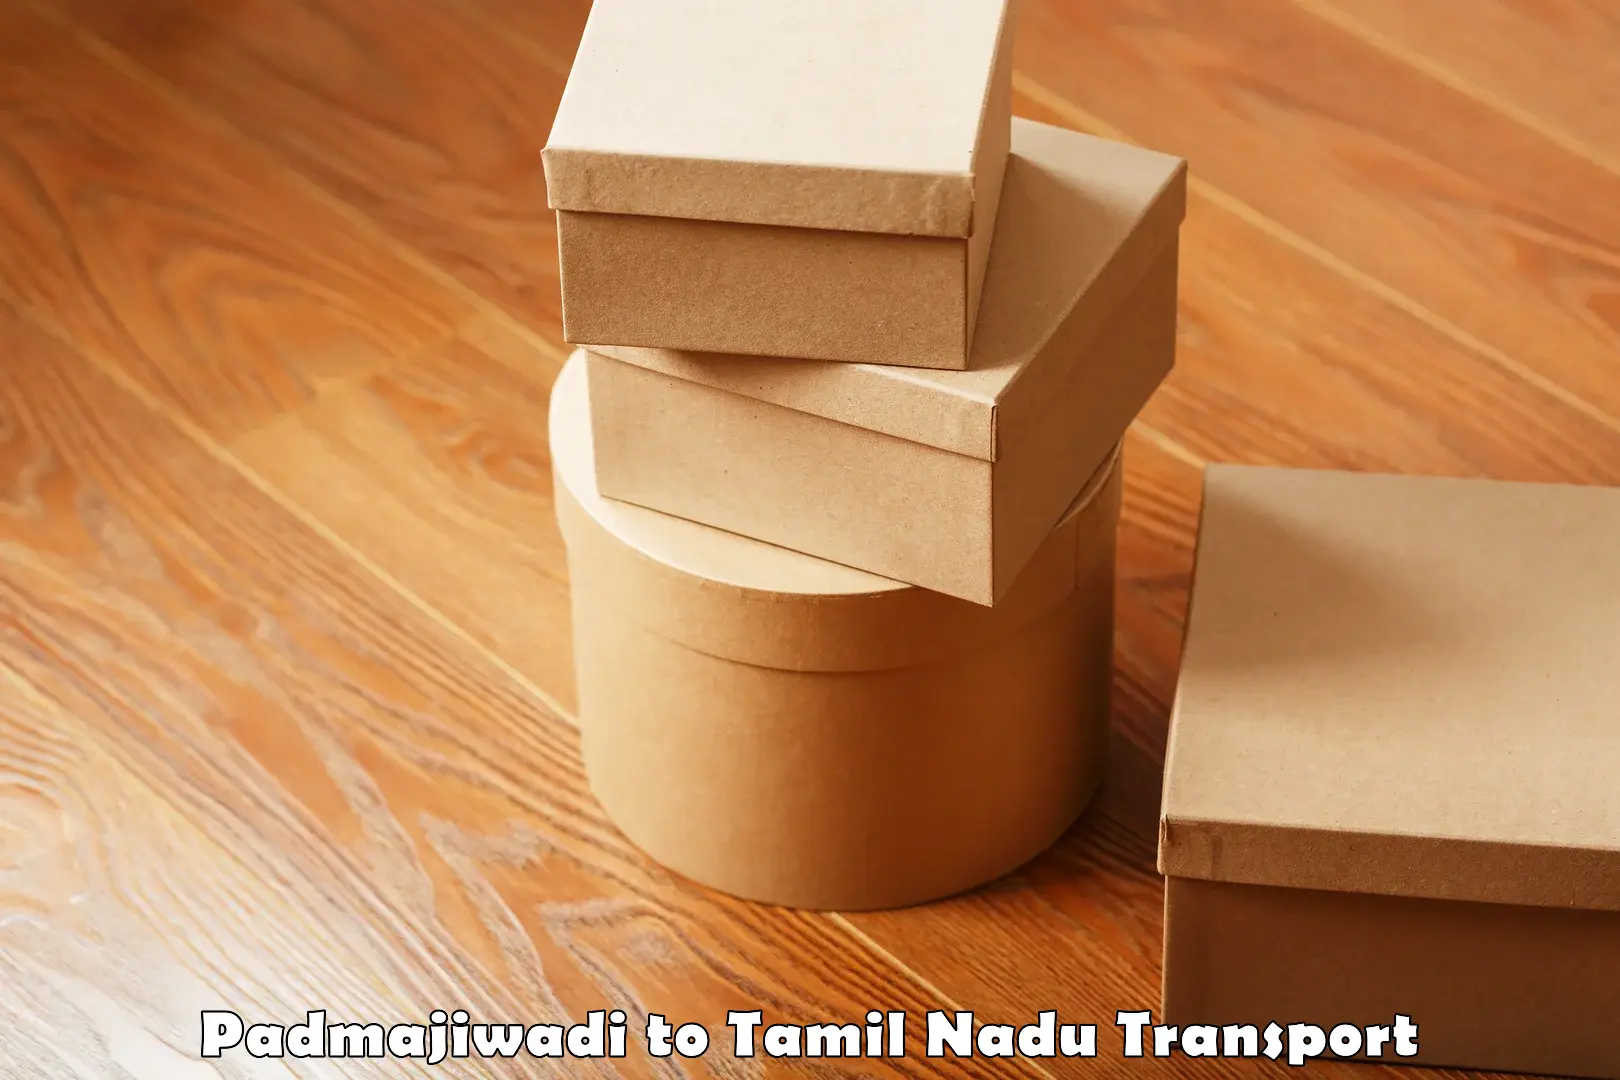 Cargo transport services Padmajiwadi to Shanmugha Arts Science Technology and Research Academy Thanjavur